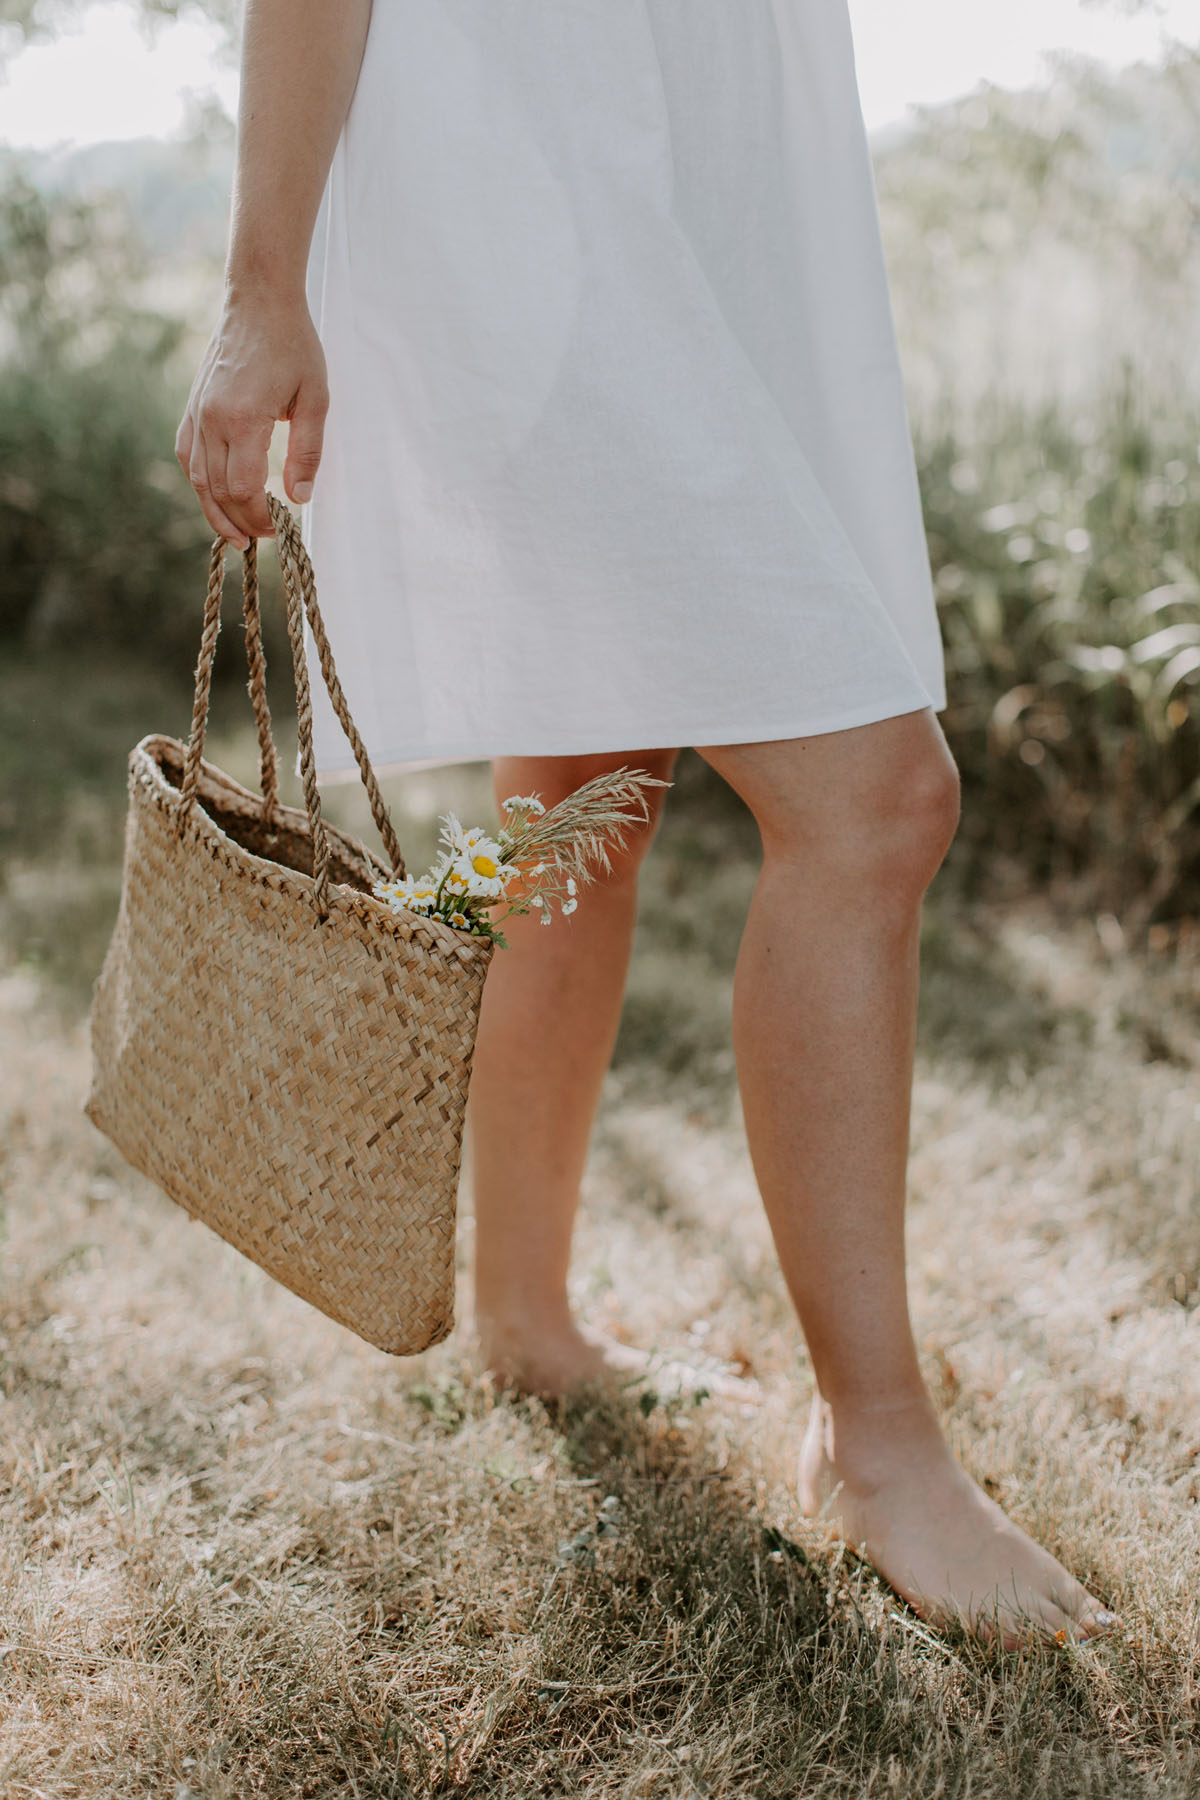 image shows a woman wearing a white dress and holding a woven bag